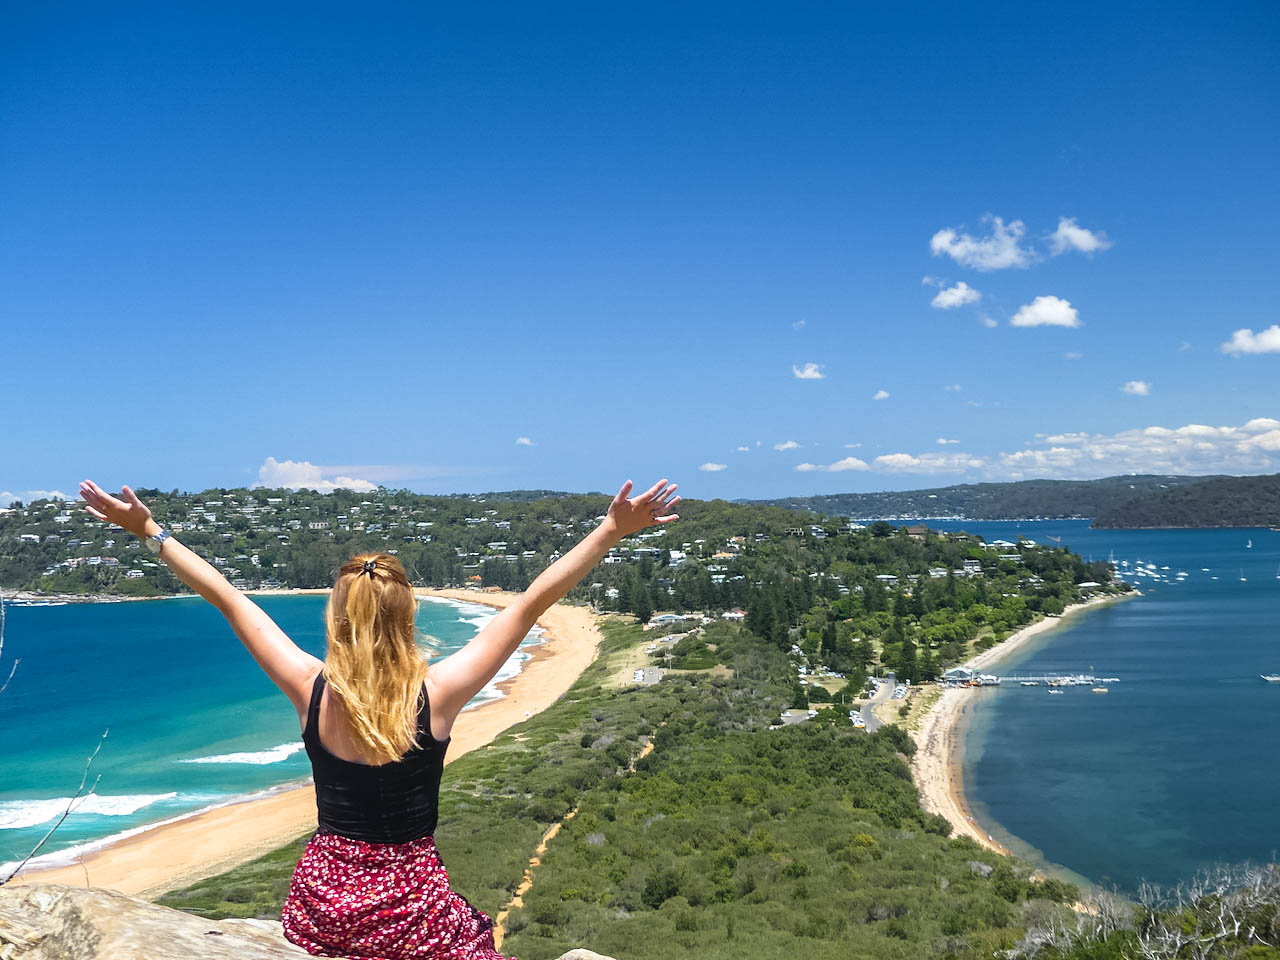 Planning a road trip from Sydney to Brisbane? Deciding what to see between Sydney and Brisbane can be overwhelming, so I've together the ultimate 14 day Sydney to Brisbane drive itinerary to help you see the best places on the Sydney to Brisbane coastal drive #sydneytobrisbane #australiaroadtrip #roadtrip #sydney #brisbane #eastcoastaustralia #backpackingaustralia #budgettravel